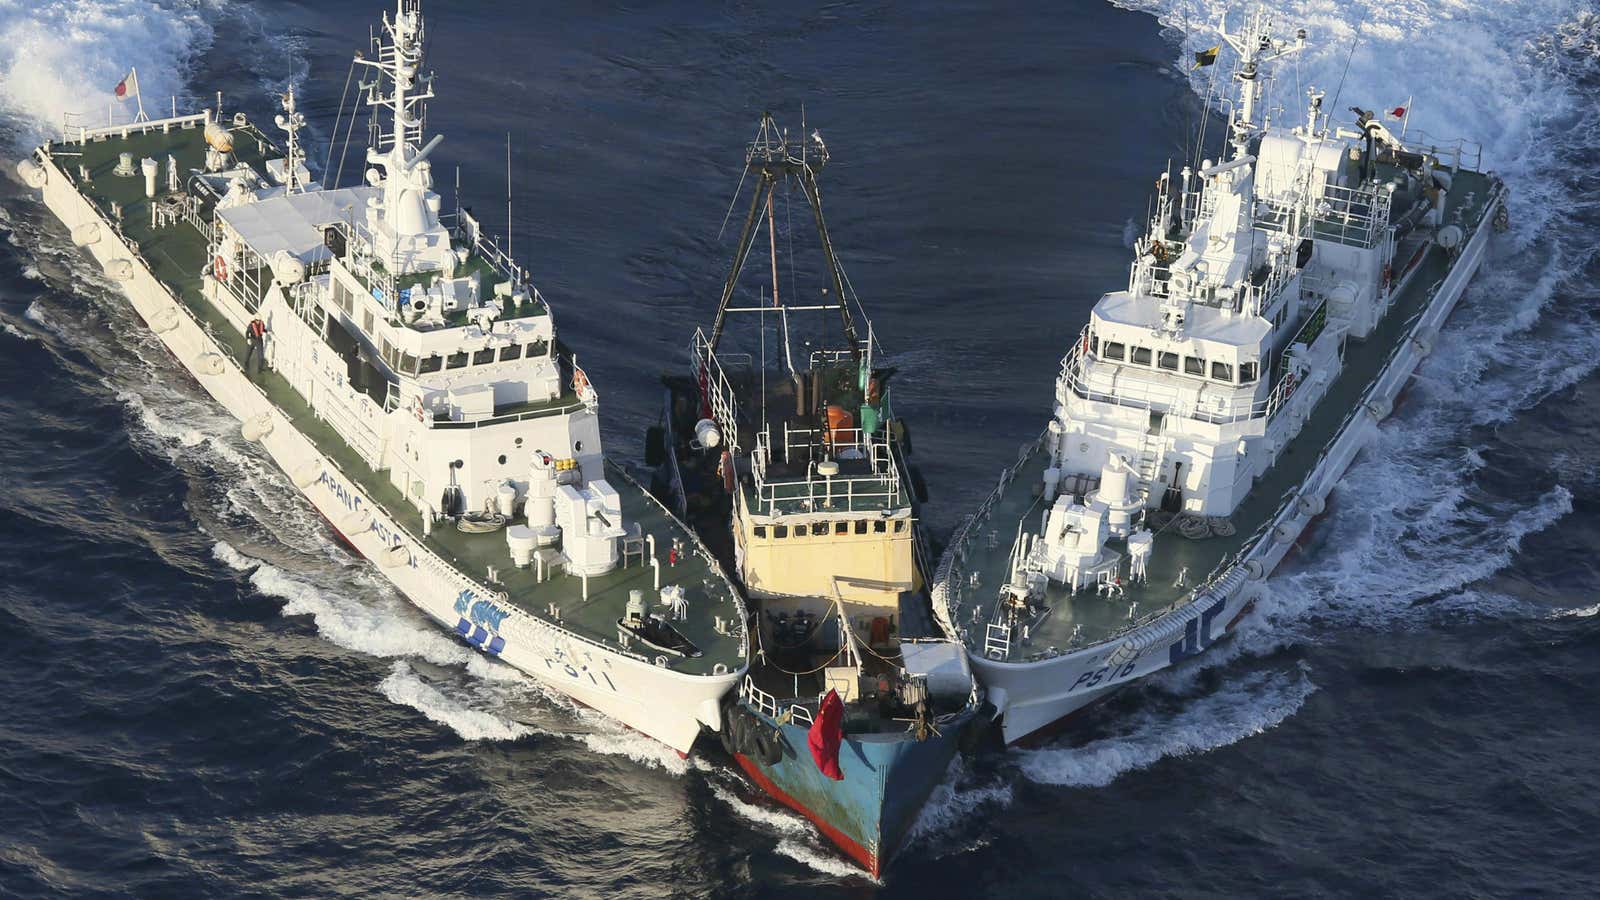 The Japanese coast guard surrounds an offending boat.